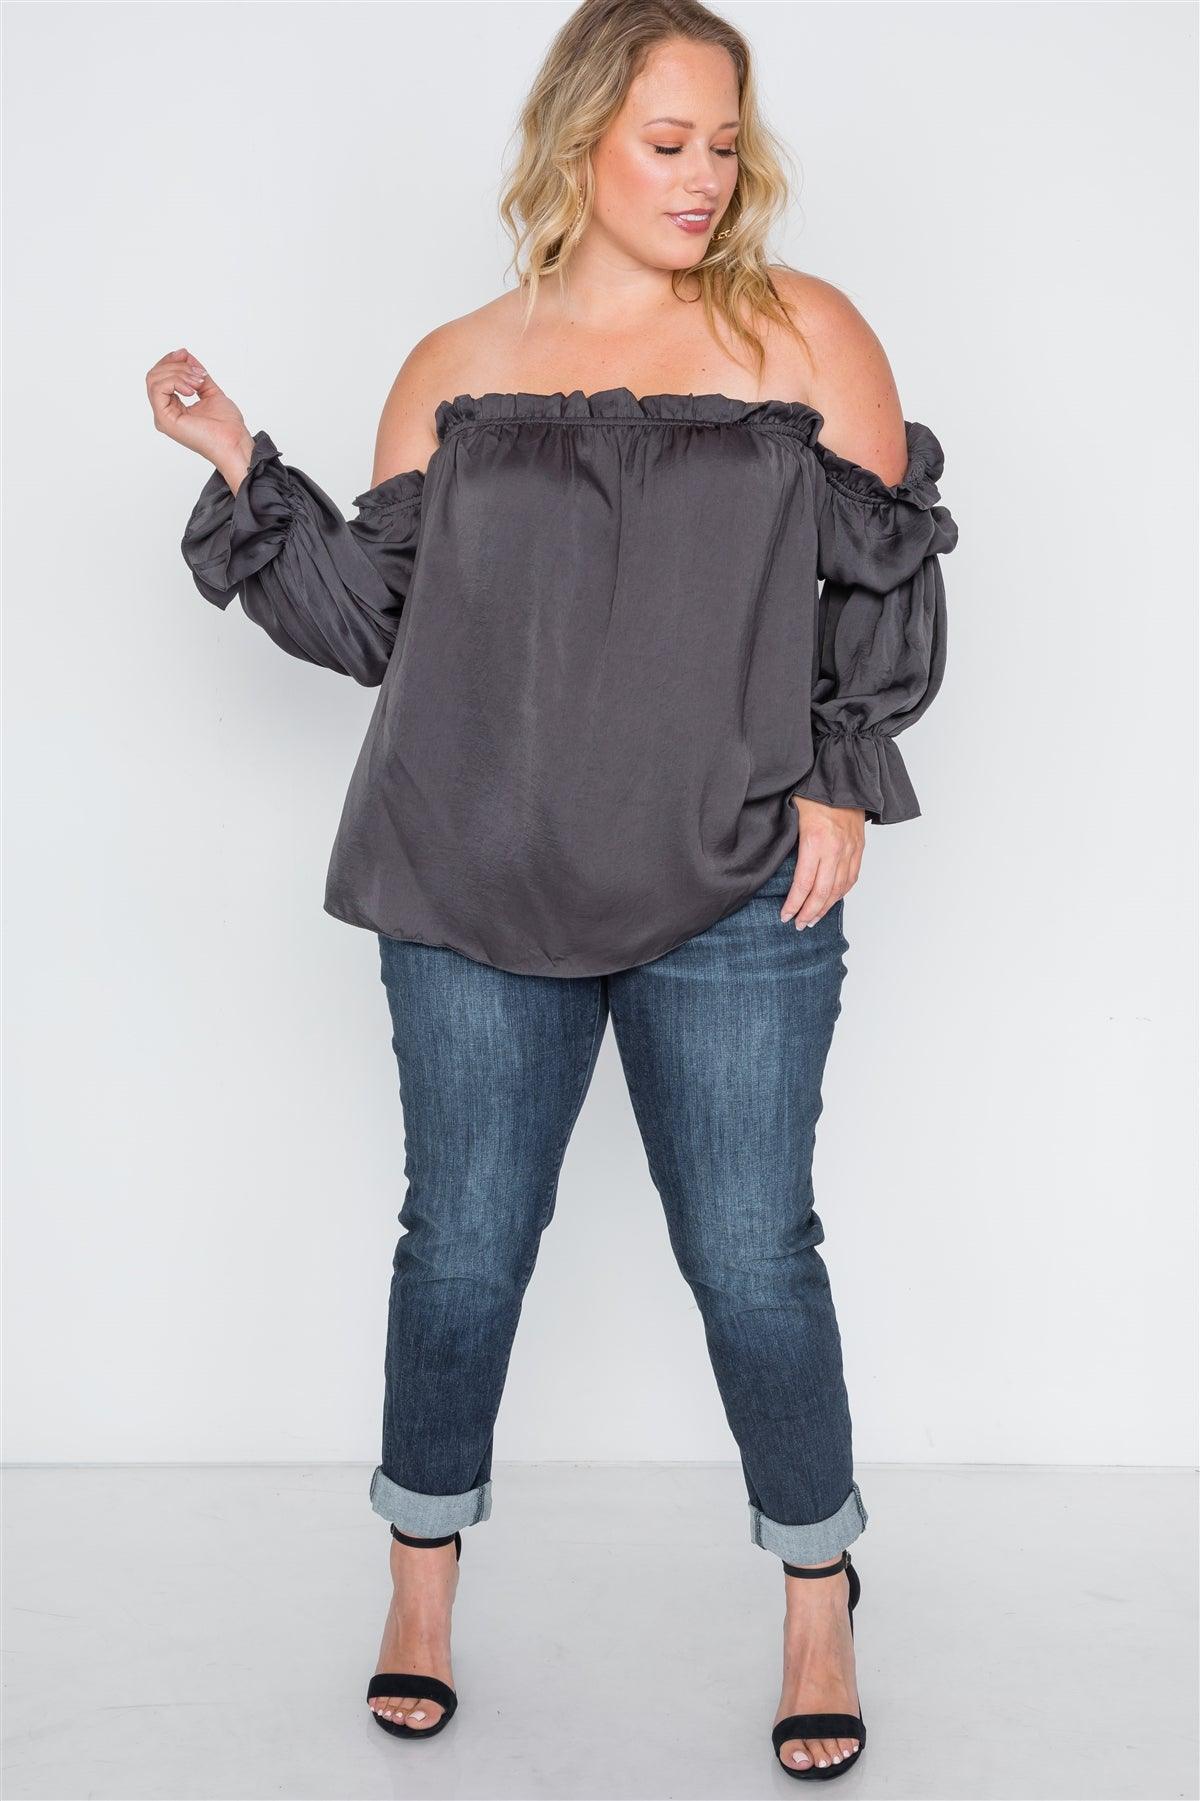 Plus Size Charcoal Ruffled Satin Evening Top /2-2-2